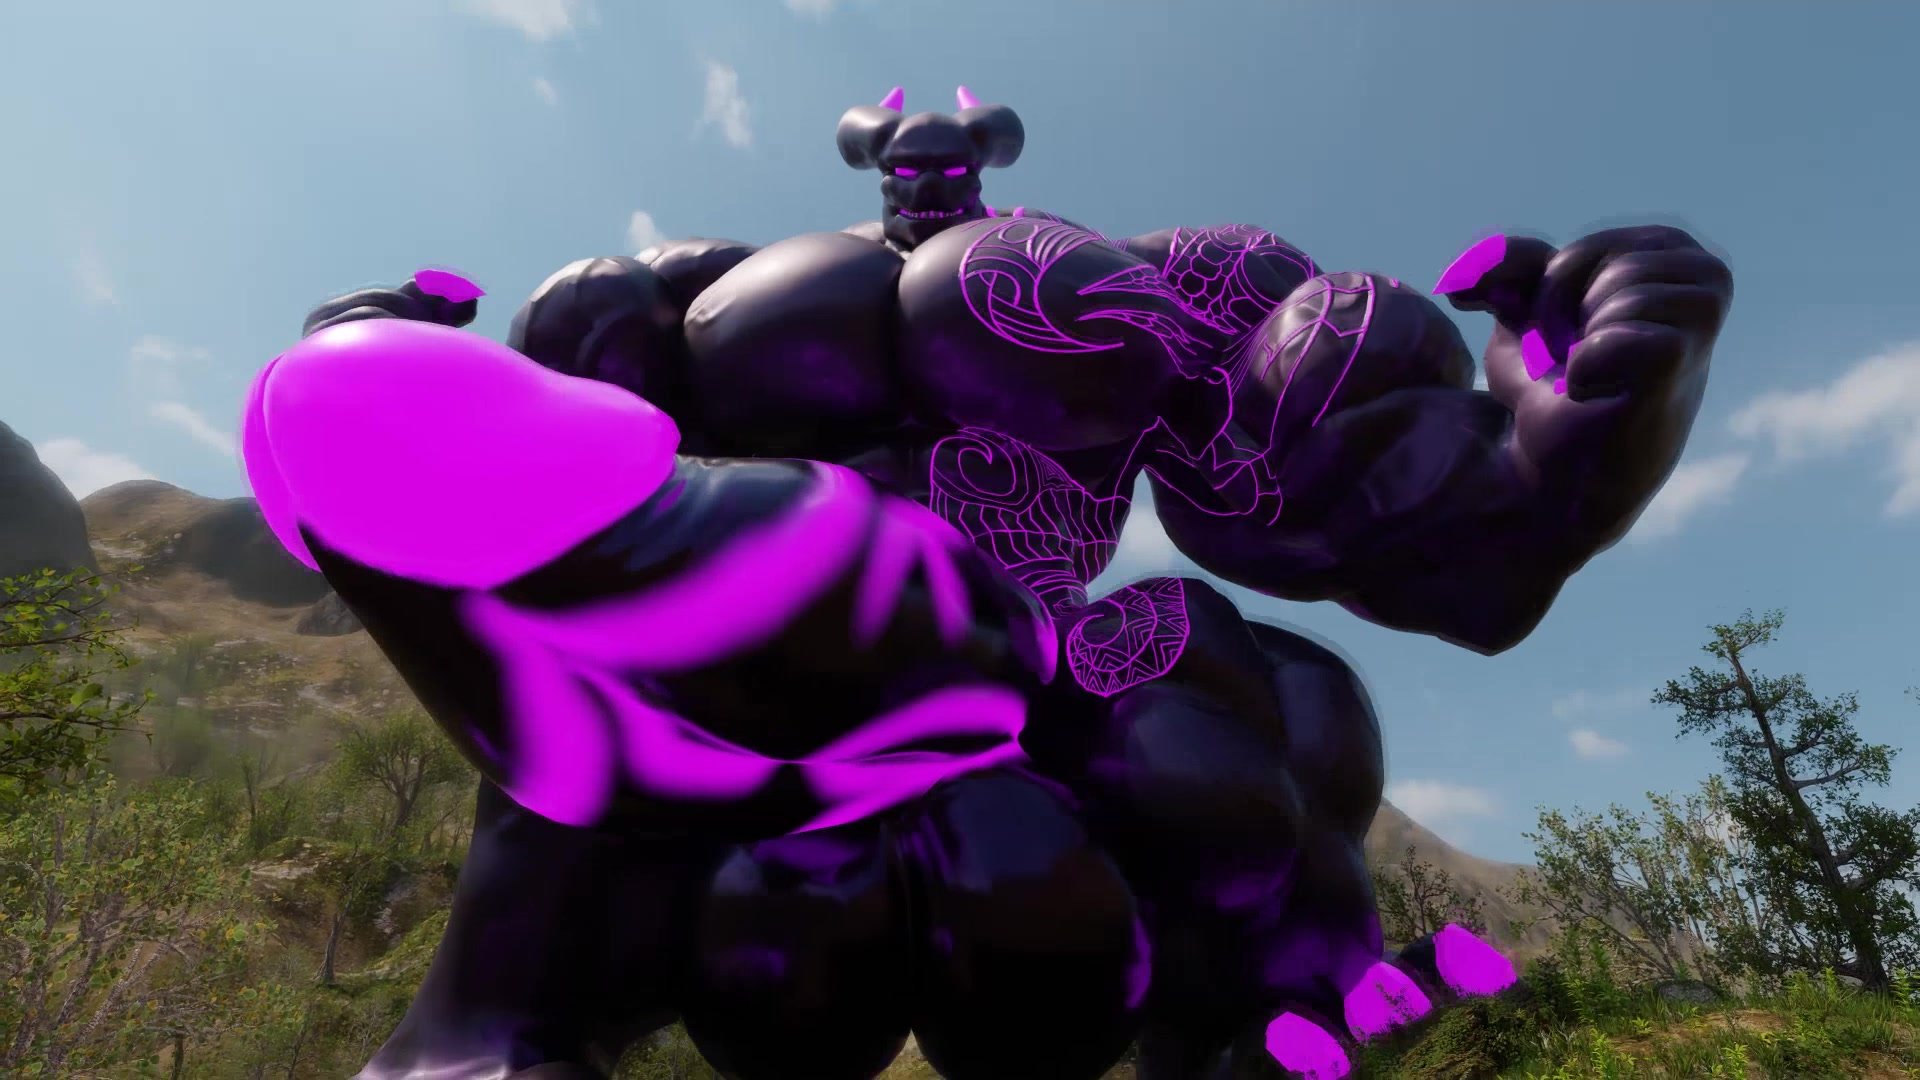 Monstrous - Macro Muscle Growth Animation